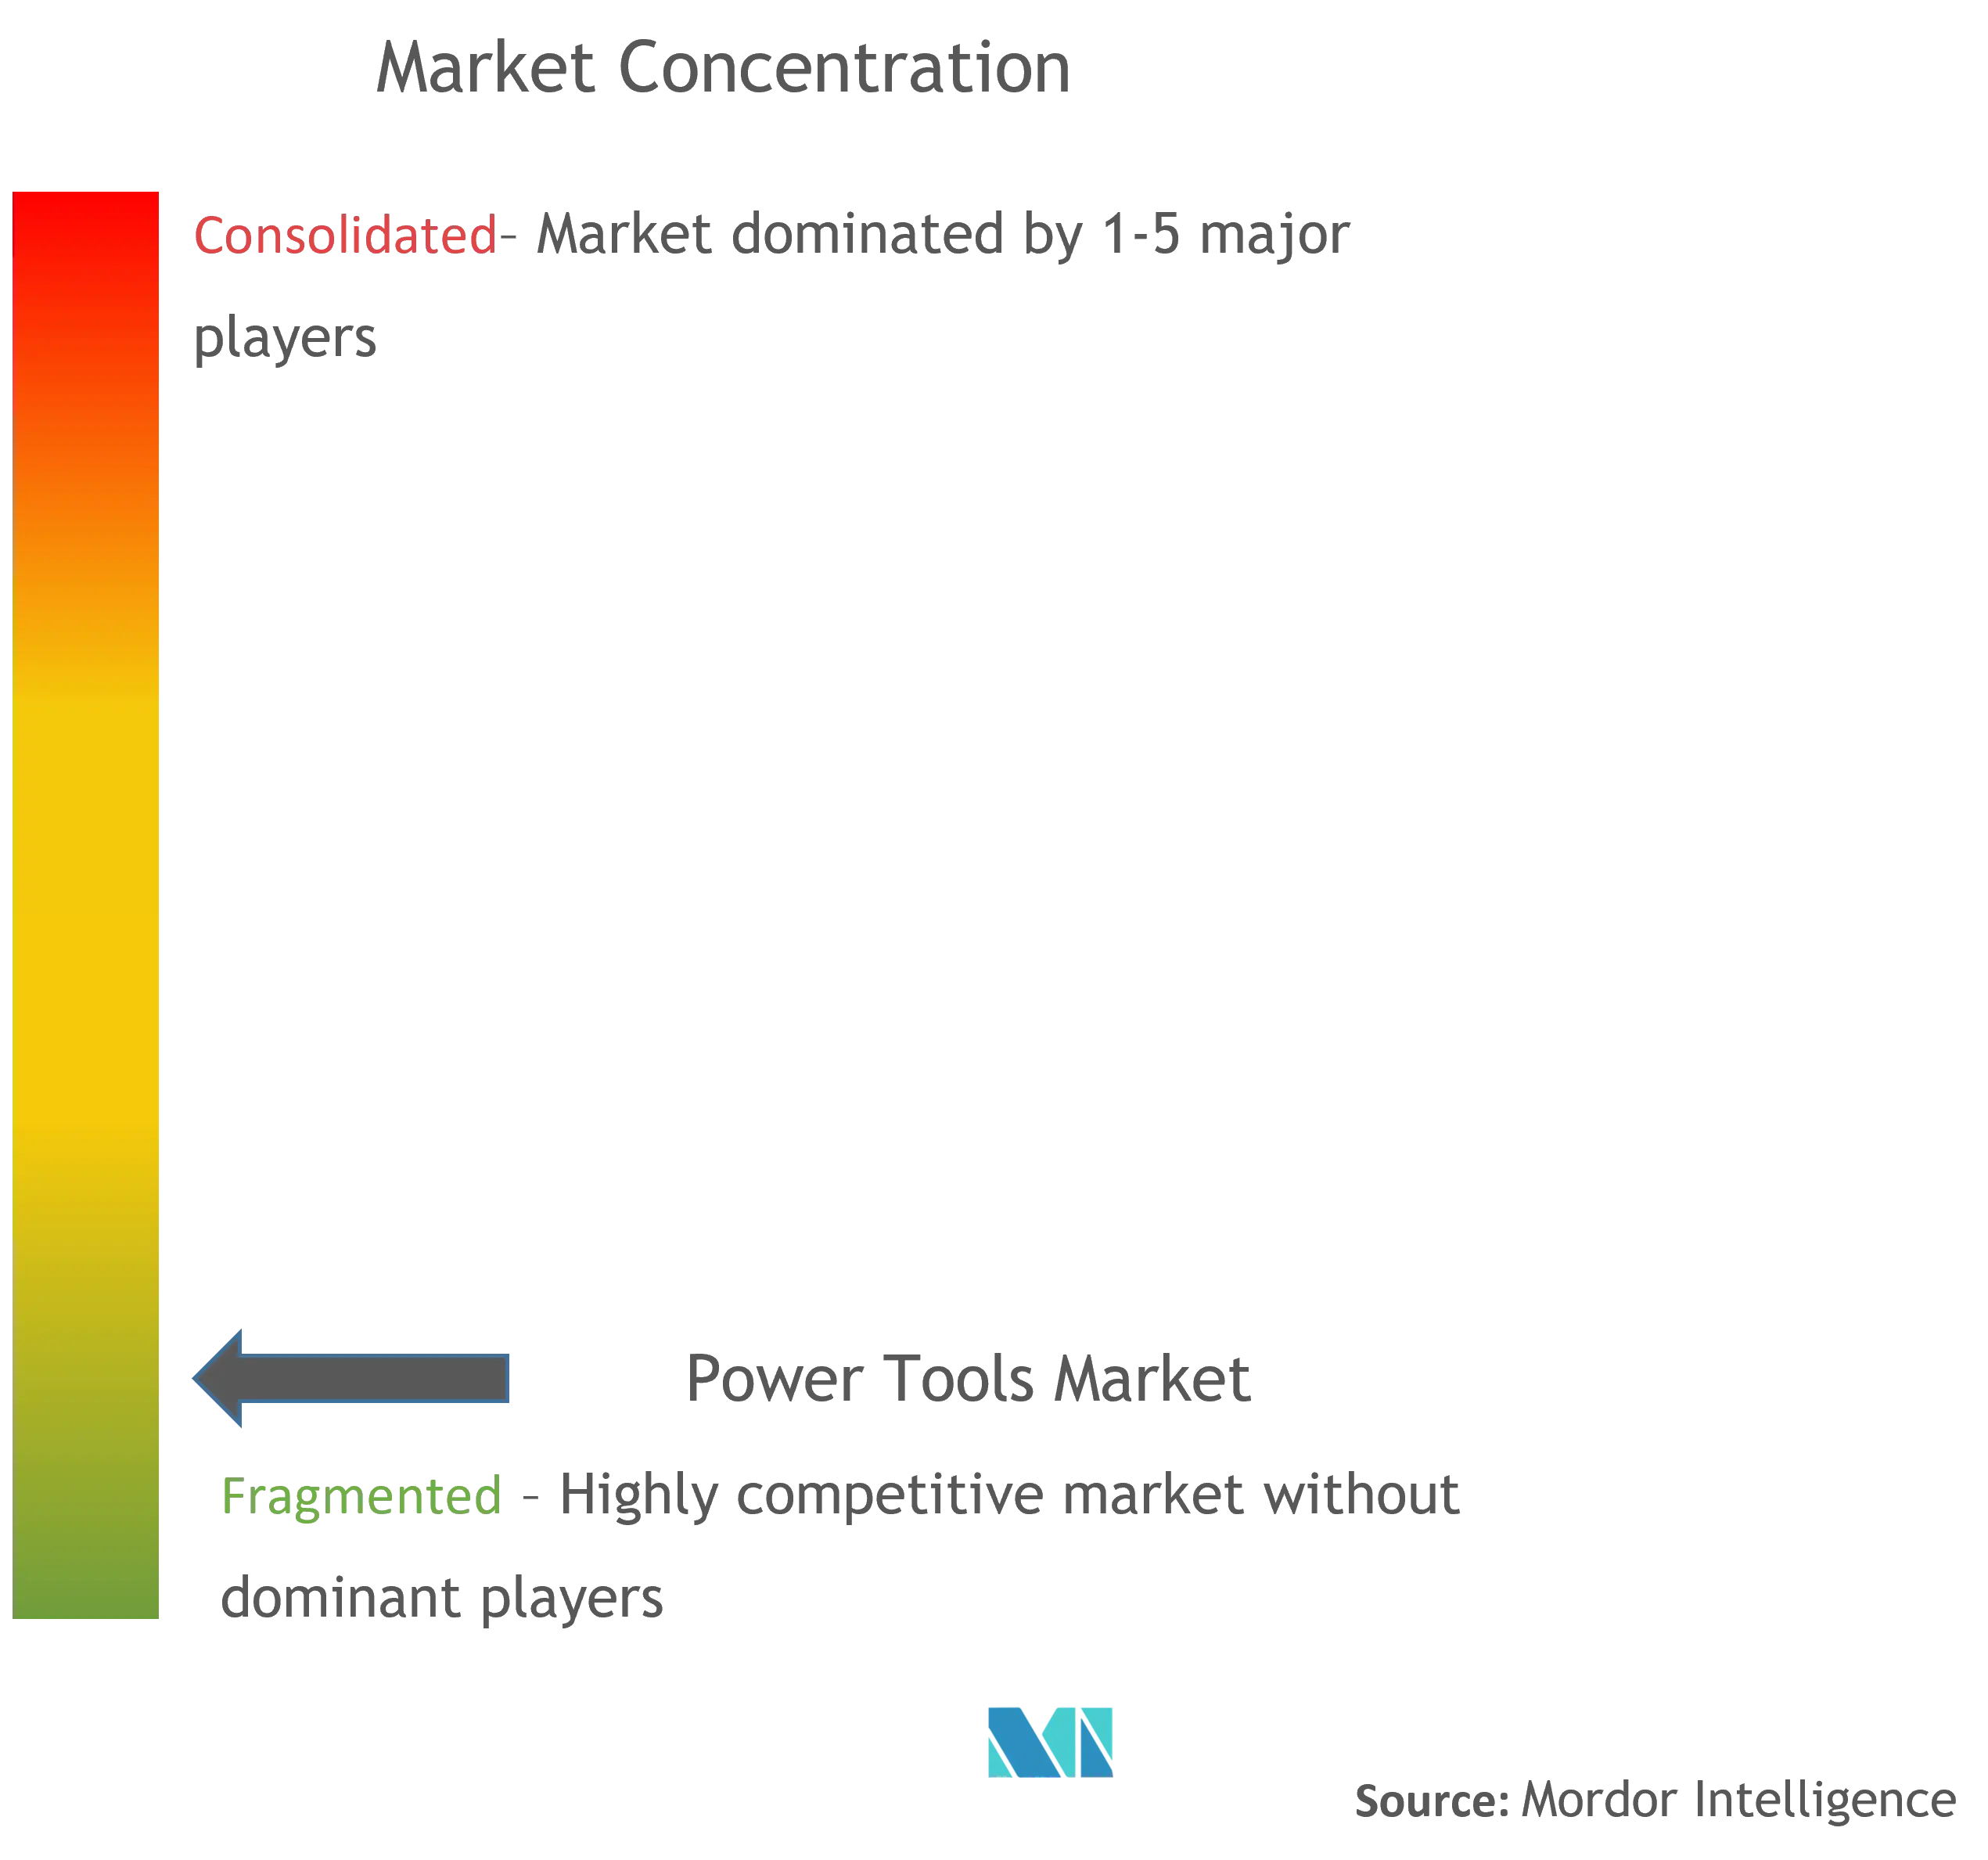 Power Tools Market Concentration